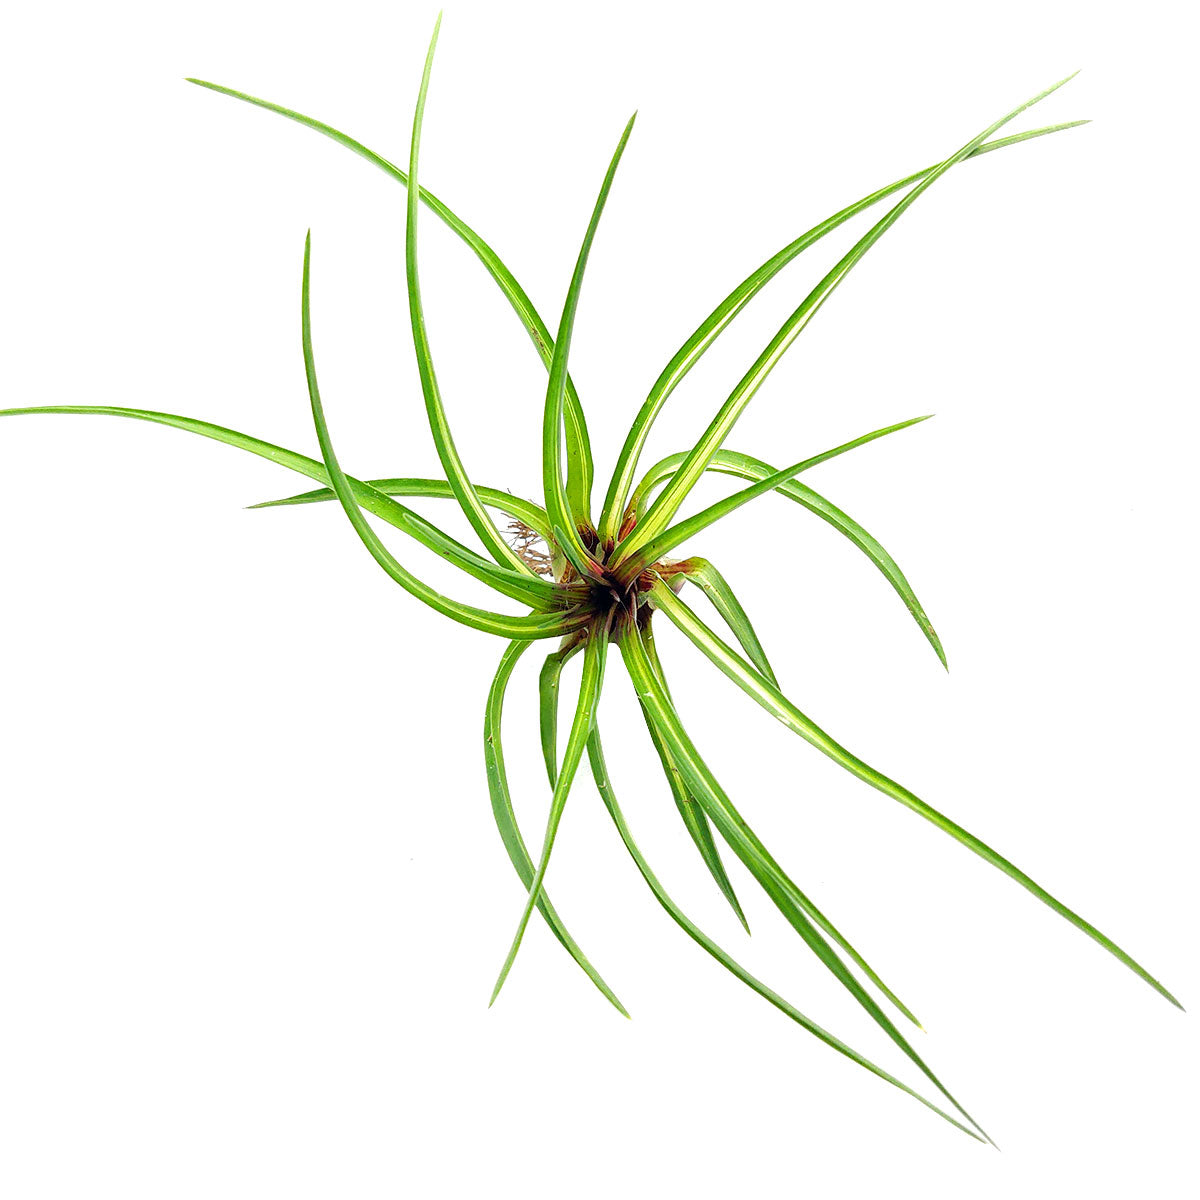 Tillandsia Cyanea Air Plant for sale, unique air plant gift decor ideas, How to care for Tillandsia Cyanea Air Plant, Tillandsia Cyanea Air Plant with care guide, Pink Quill Plant